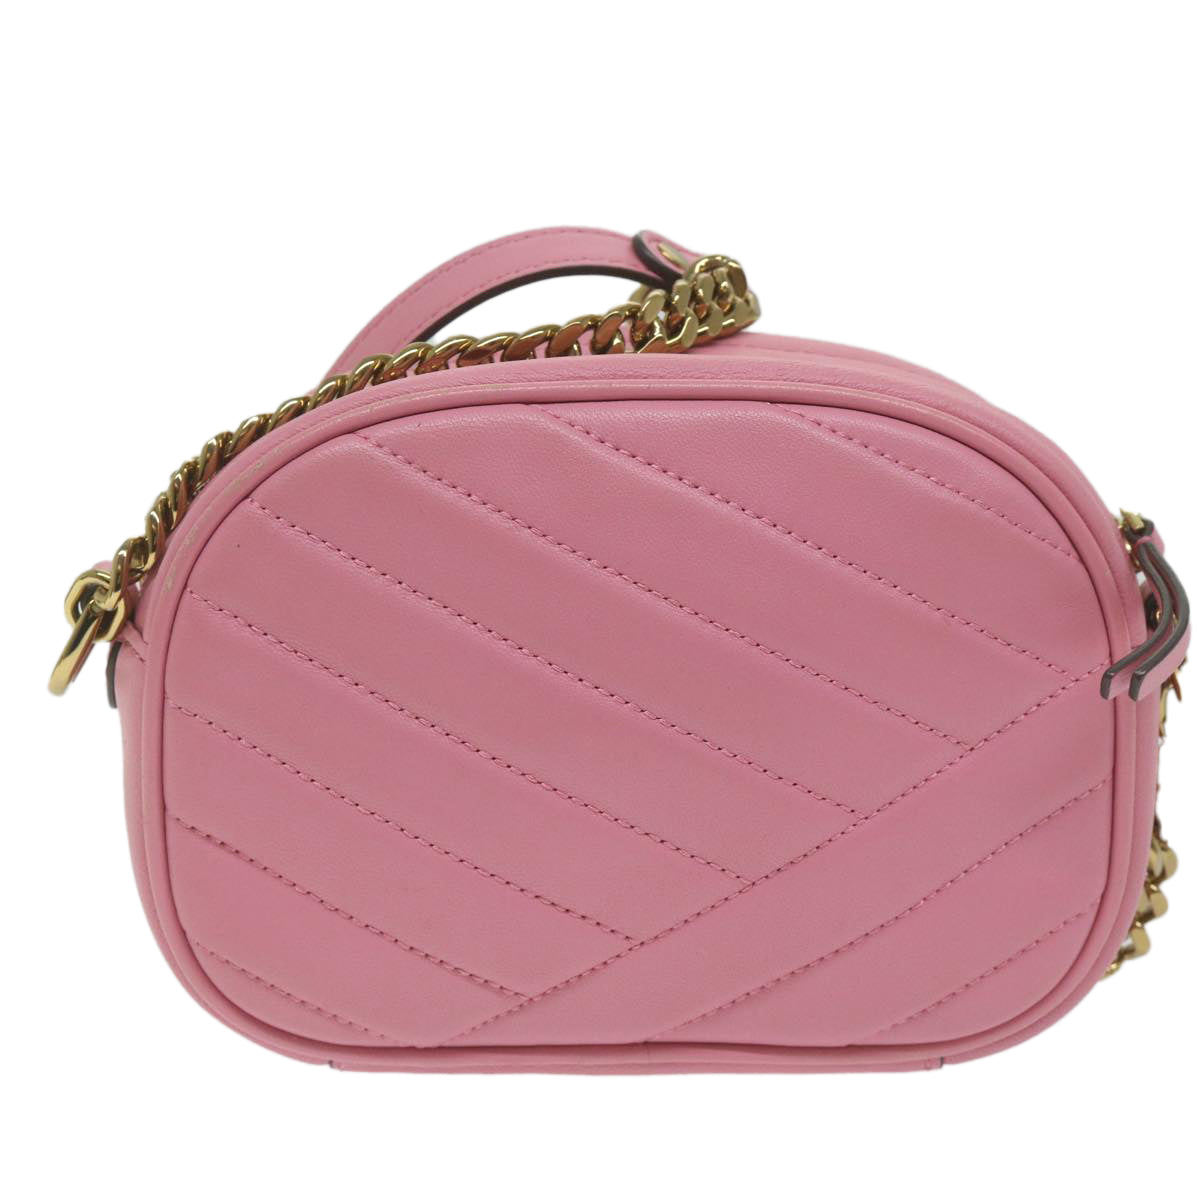 TORY BURCH Quilted Chain Shoulder Bag Leather Pink Auth am5420 - 0